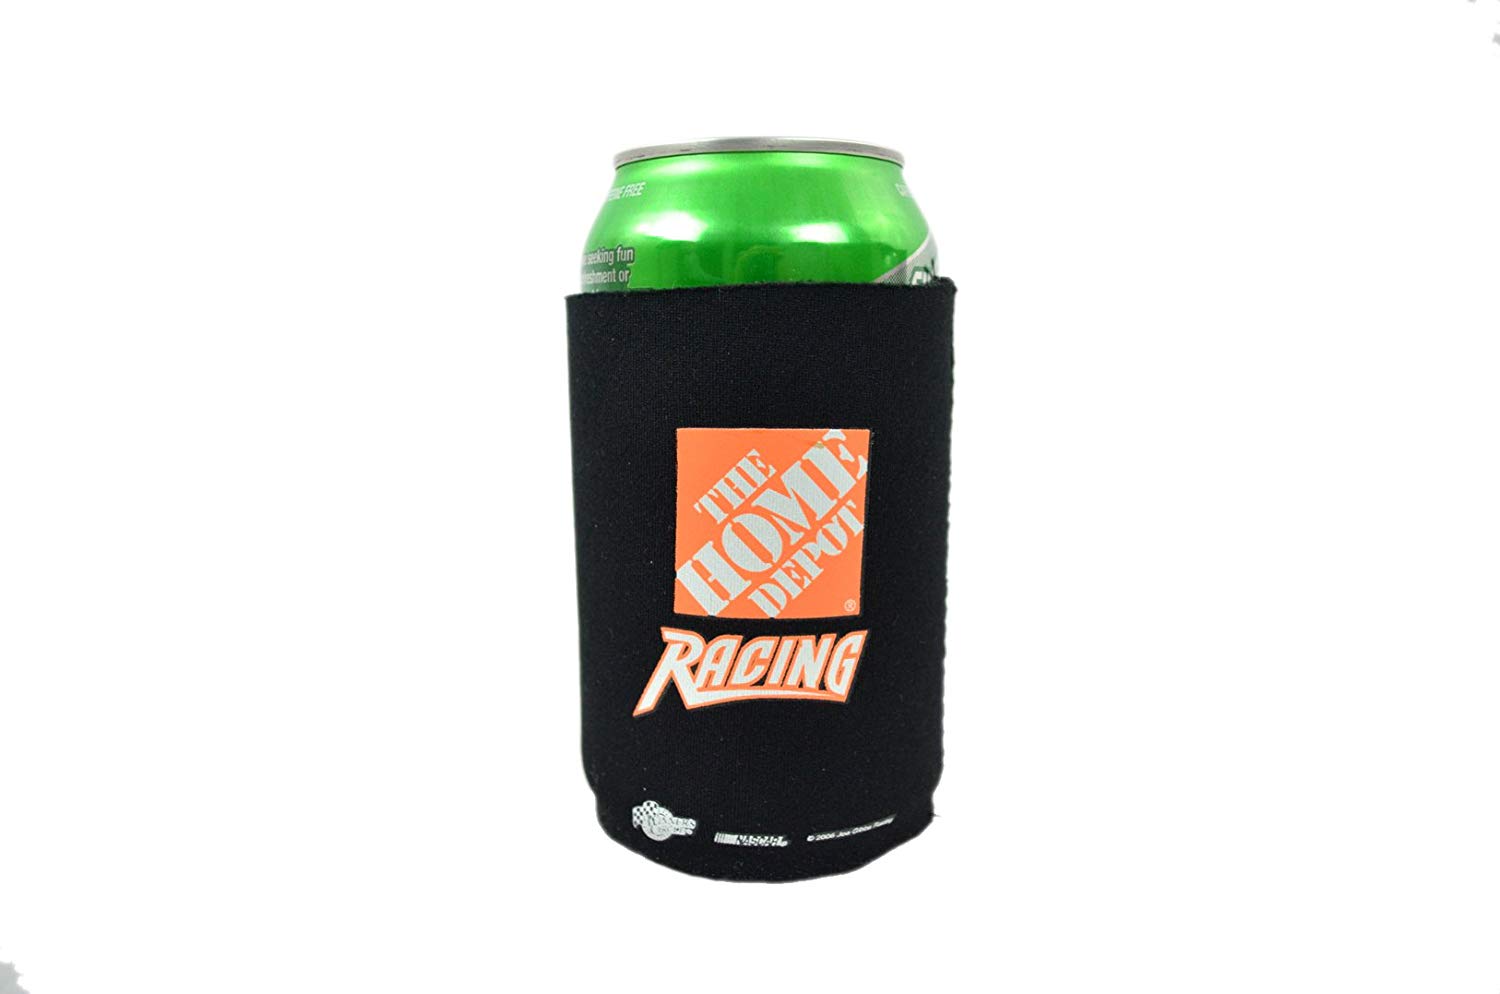 Official NASCAR Fan Shop Authentic 2-pack 12 Oz Can Insulator. Show Team Pride for your favorite NASCAR driver. Enjoy Your Favorite 12 Oz Can Beverage and keep your Drink Nice and Cold.